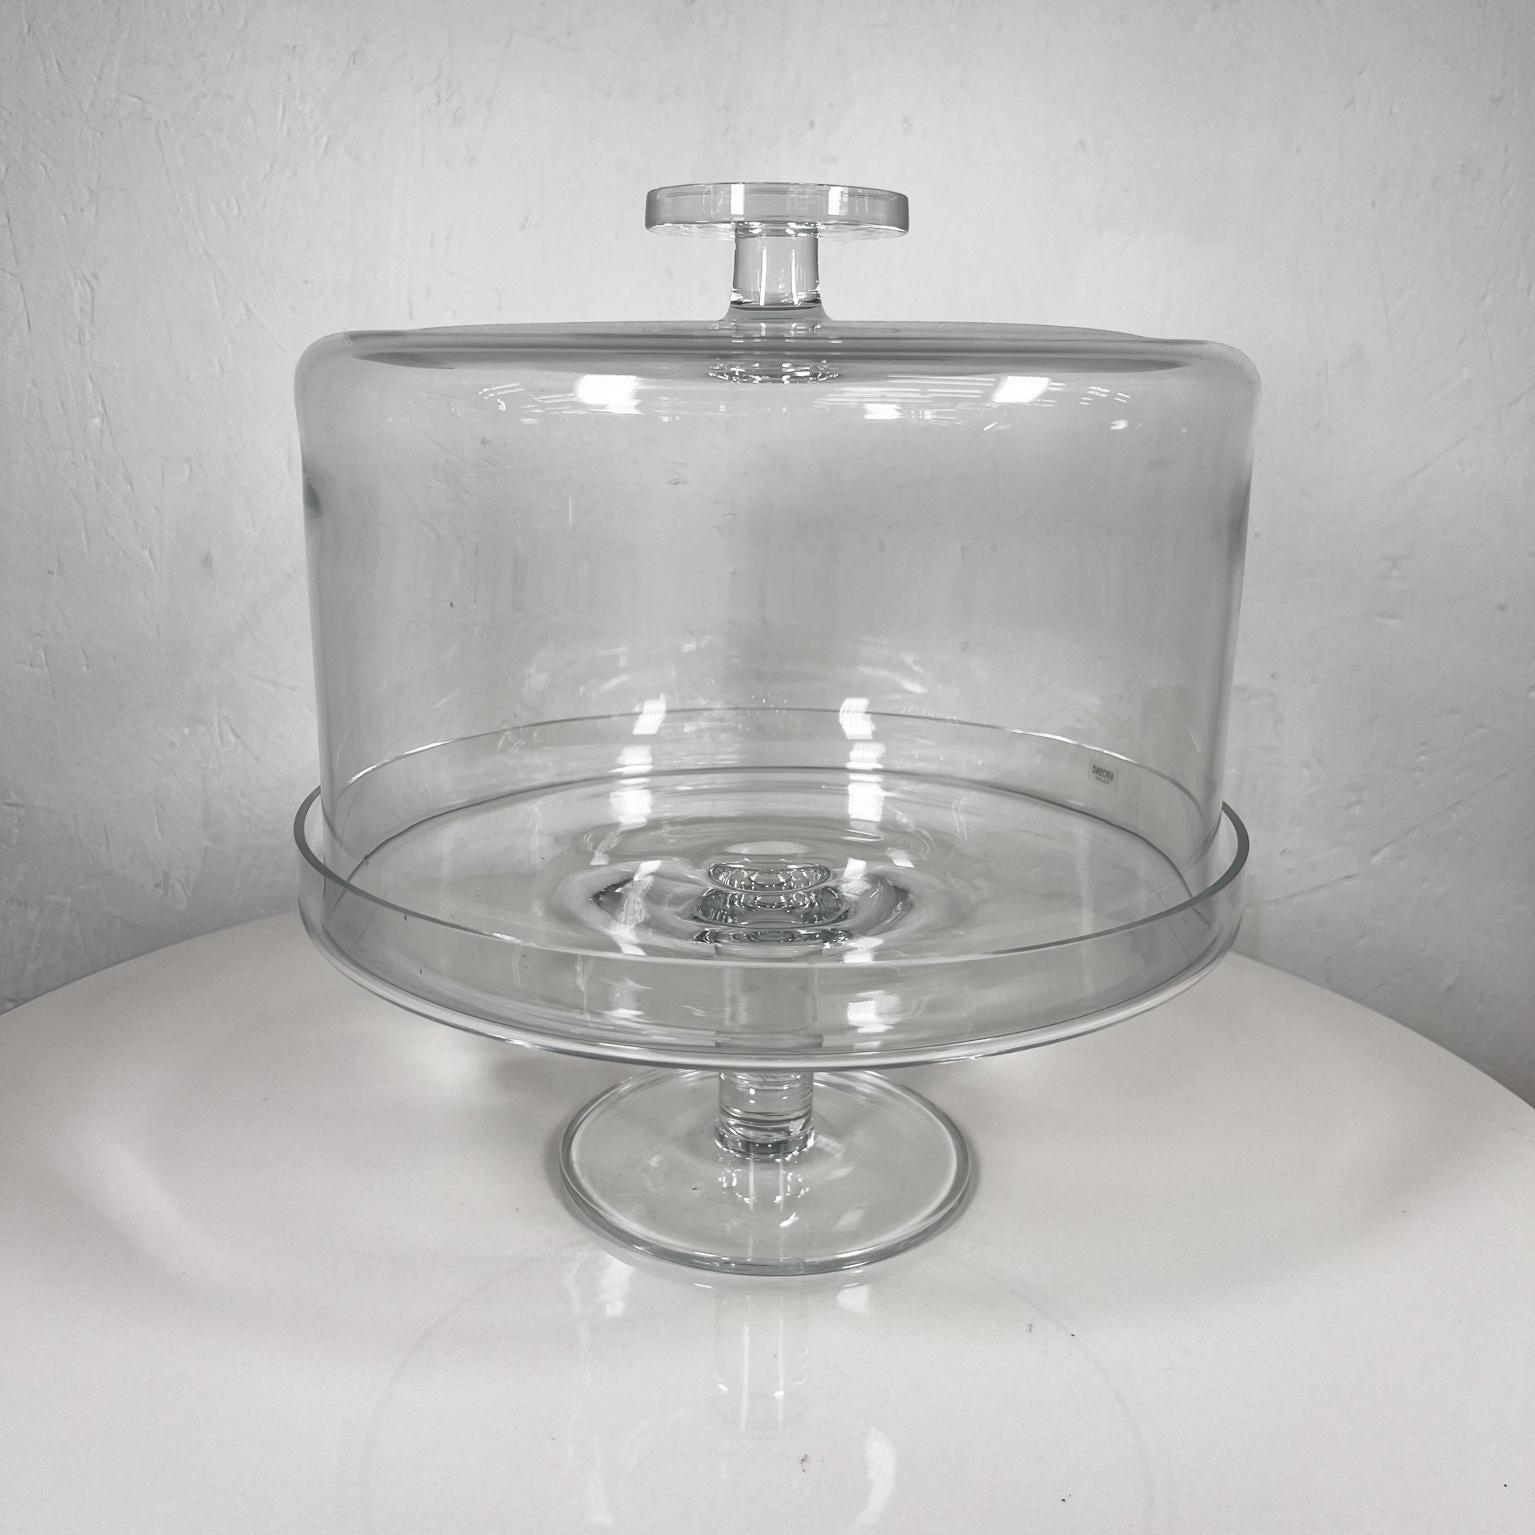 Exquisite Modern Large Domed Pedestal Glass Cake Stand
2-piece dome and stand
Unmarked
11.75 tall x 11 diameter
Original vintage preowned condition
See all images.